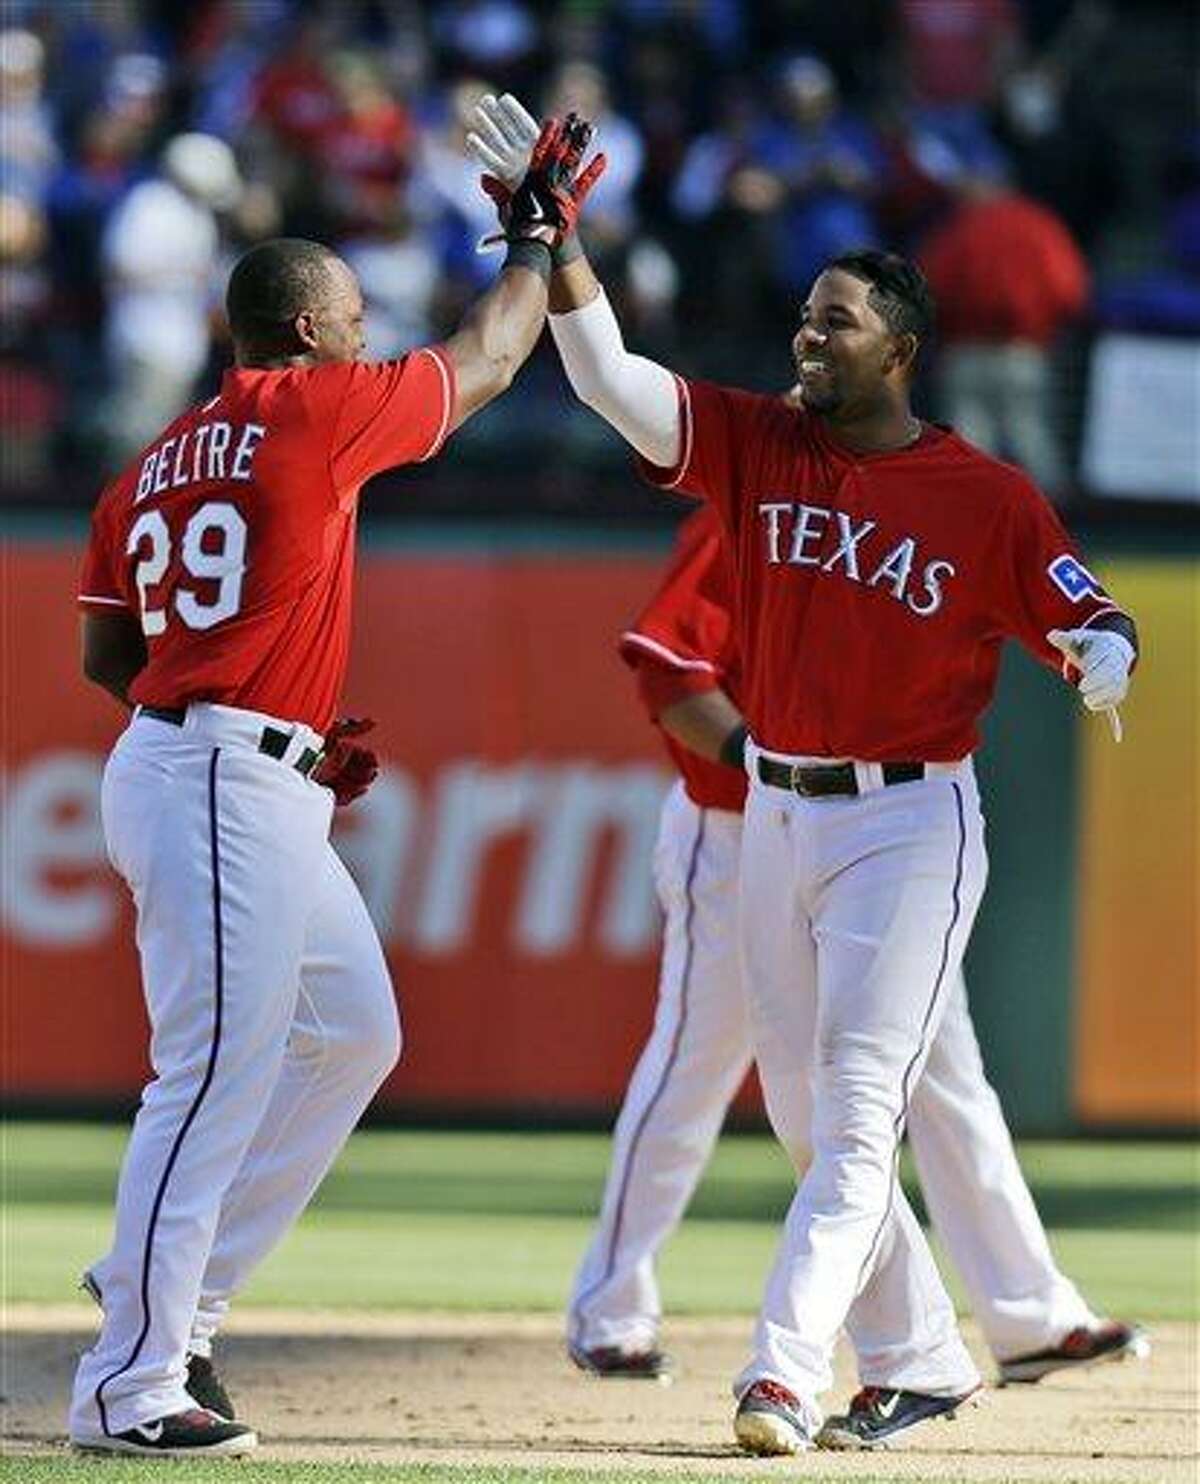 RED SOX: Rangers walk off in the ninth to defeat Red Sox